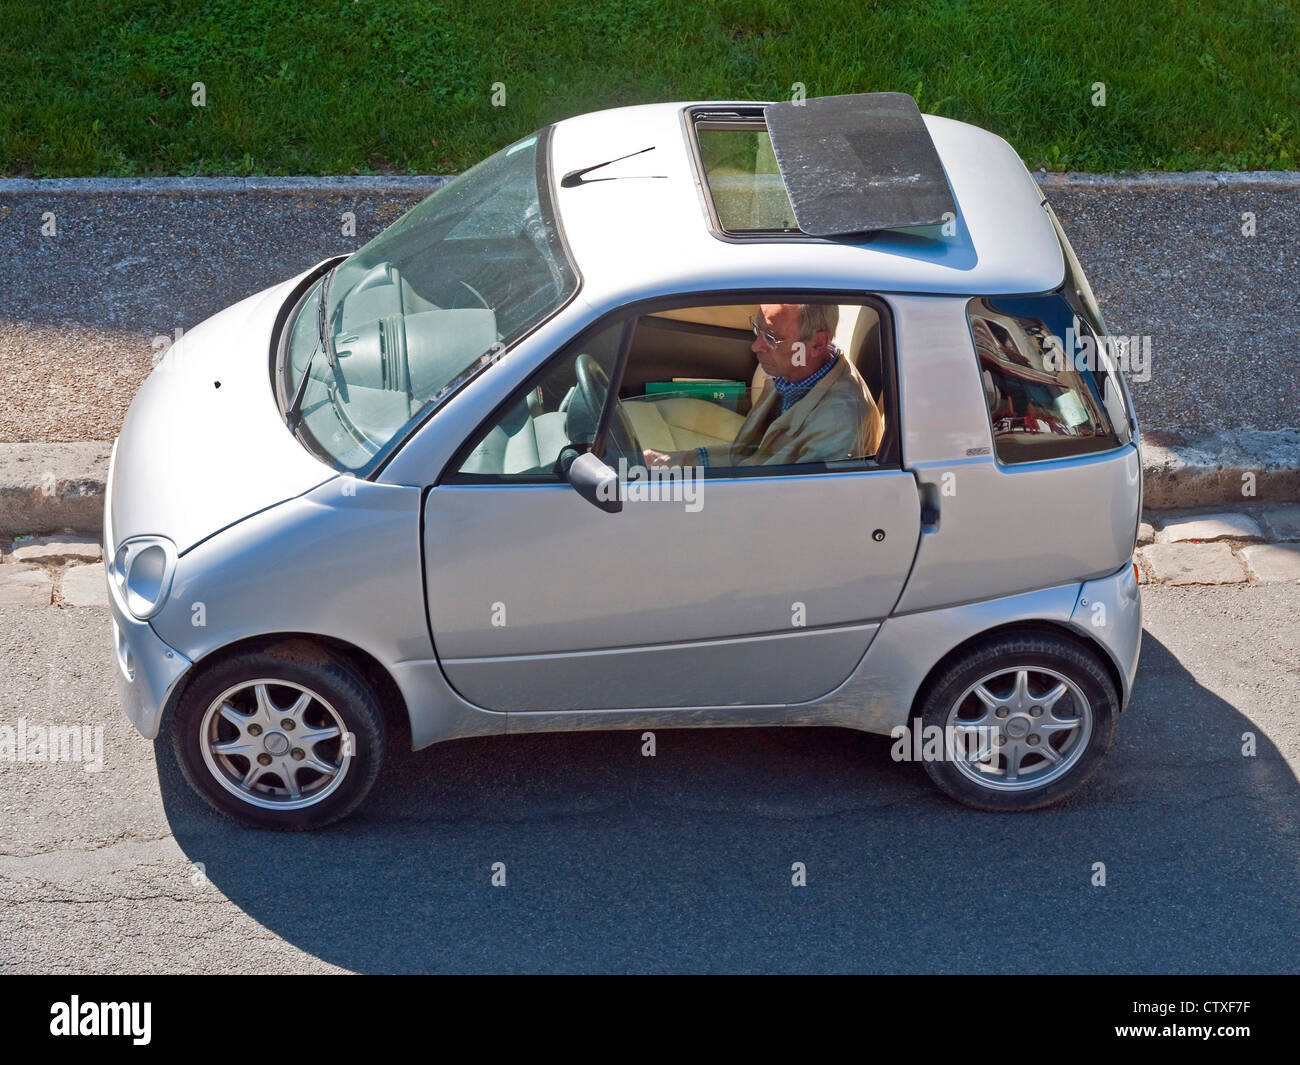 Man parking small car (used by drivers without license after drink driving convictions) - France. Stock Photo